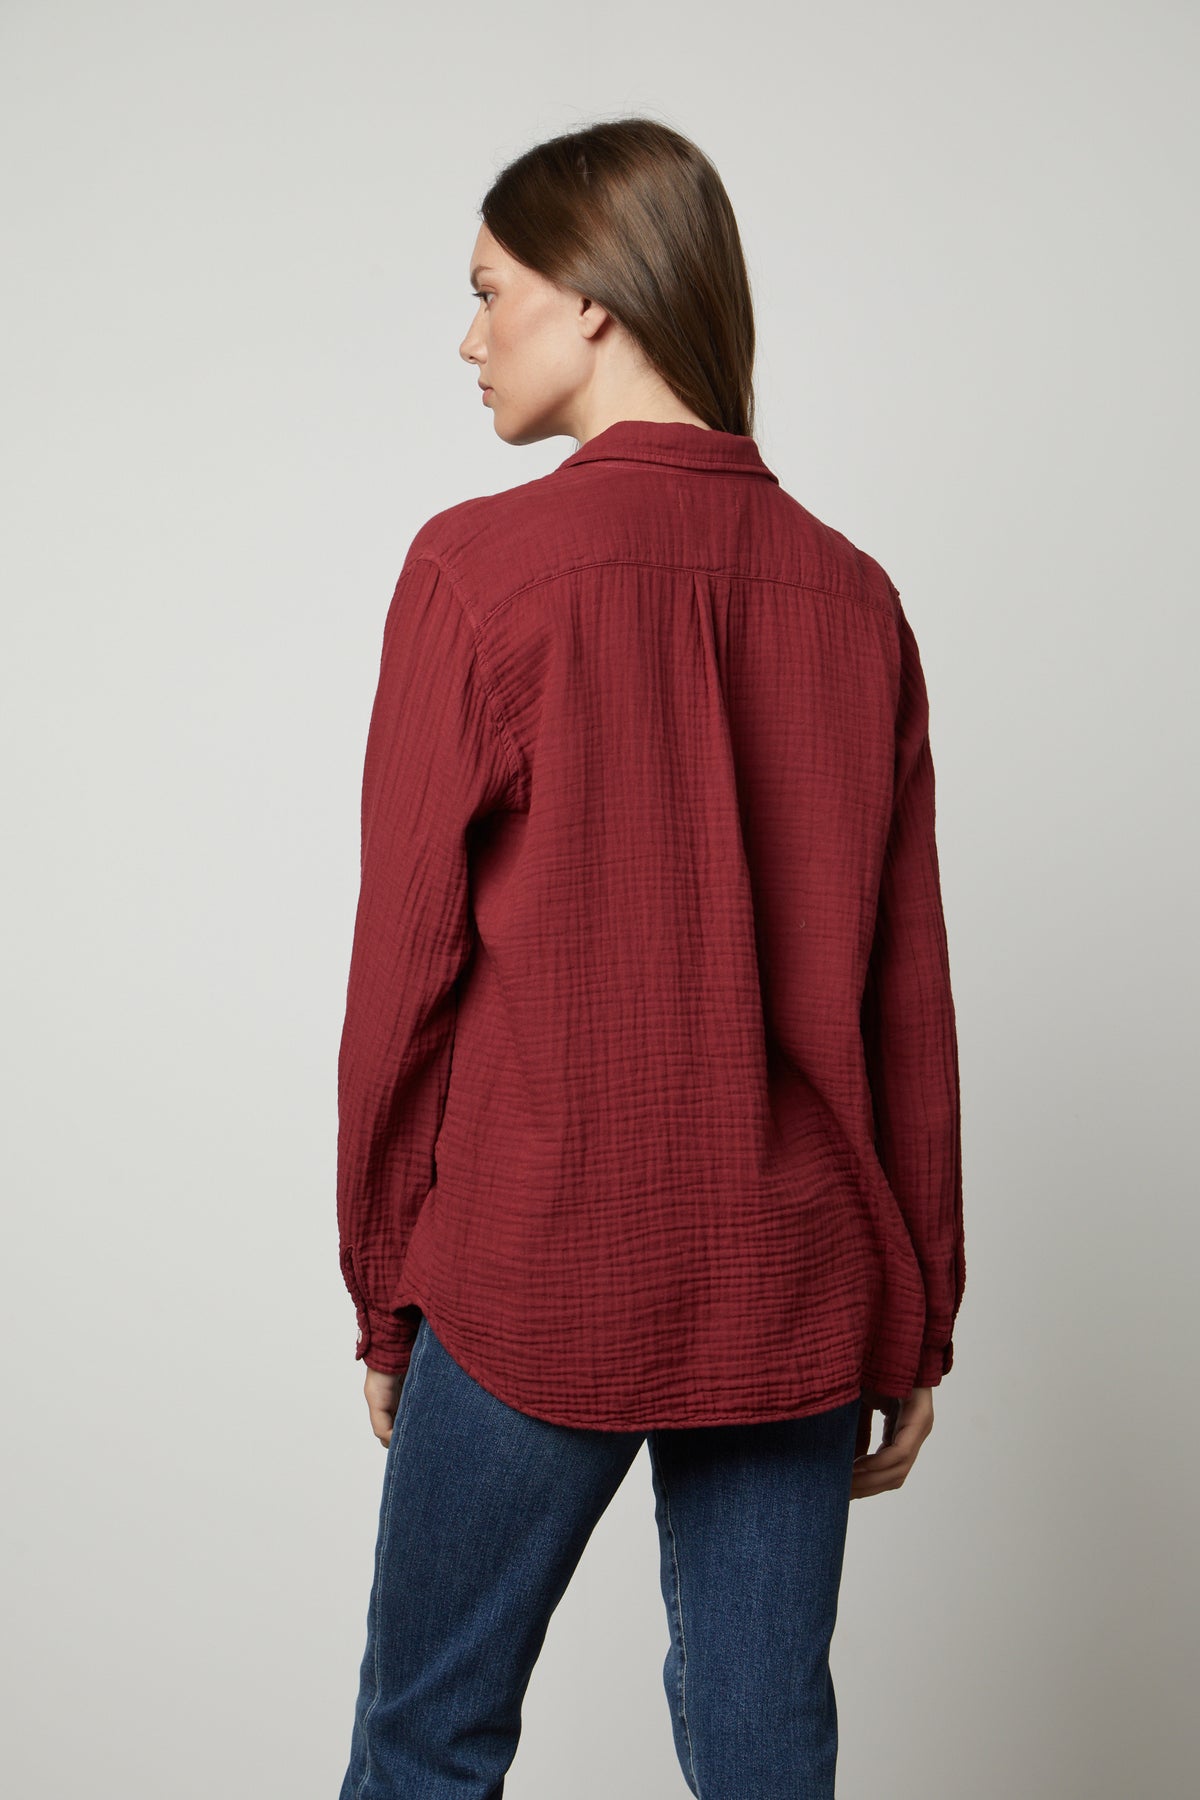 The back view of a woman wearing an oversized fit MARGO COTTON GAUZE BUTTON-UP SHIRT, made by Velvet by Graham & Spencer, and jeans.-35655728398529